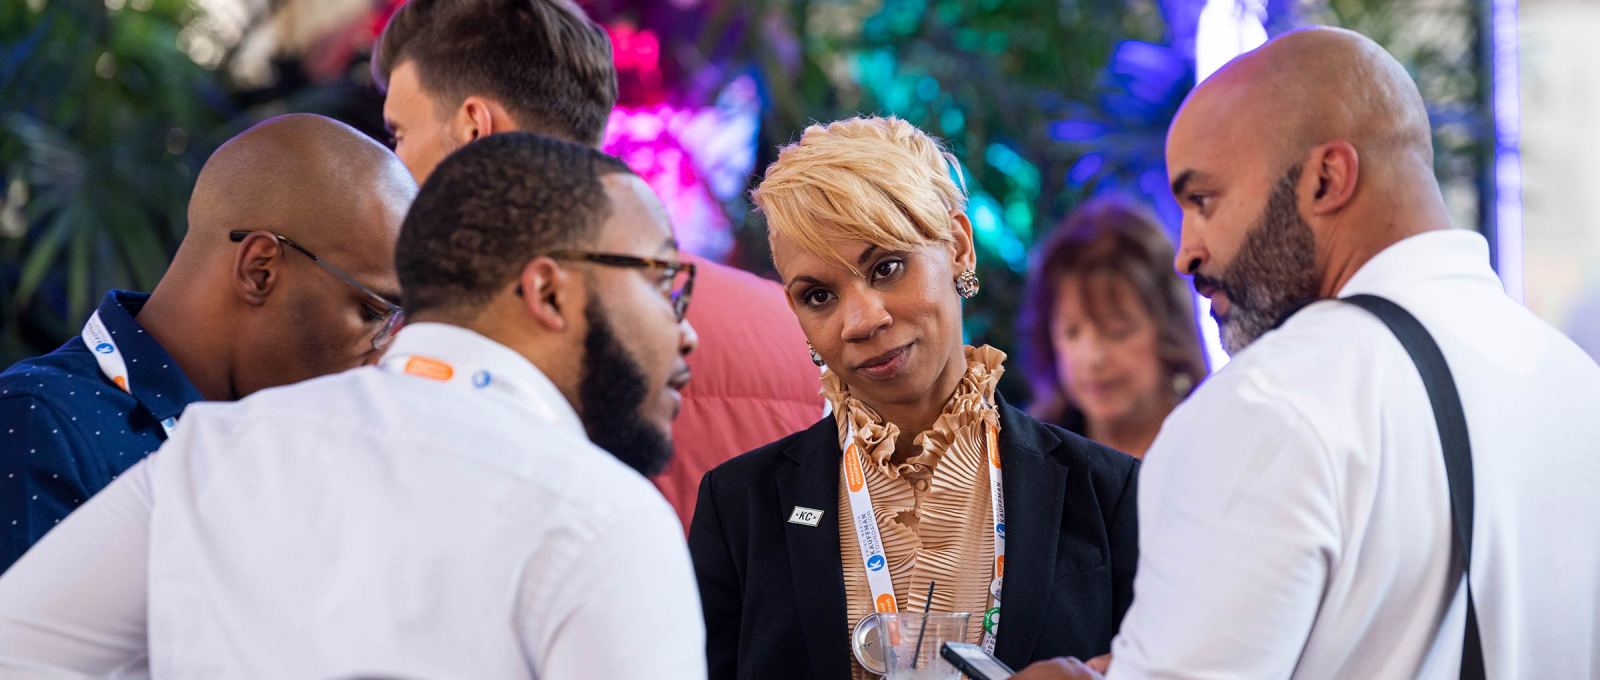 Four people of color engage in conversation, with other attendees in different conversations around them, at the 2019 ESHIP Summit conference in Kansas City, Missouri.